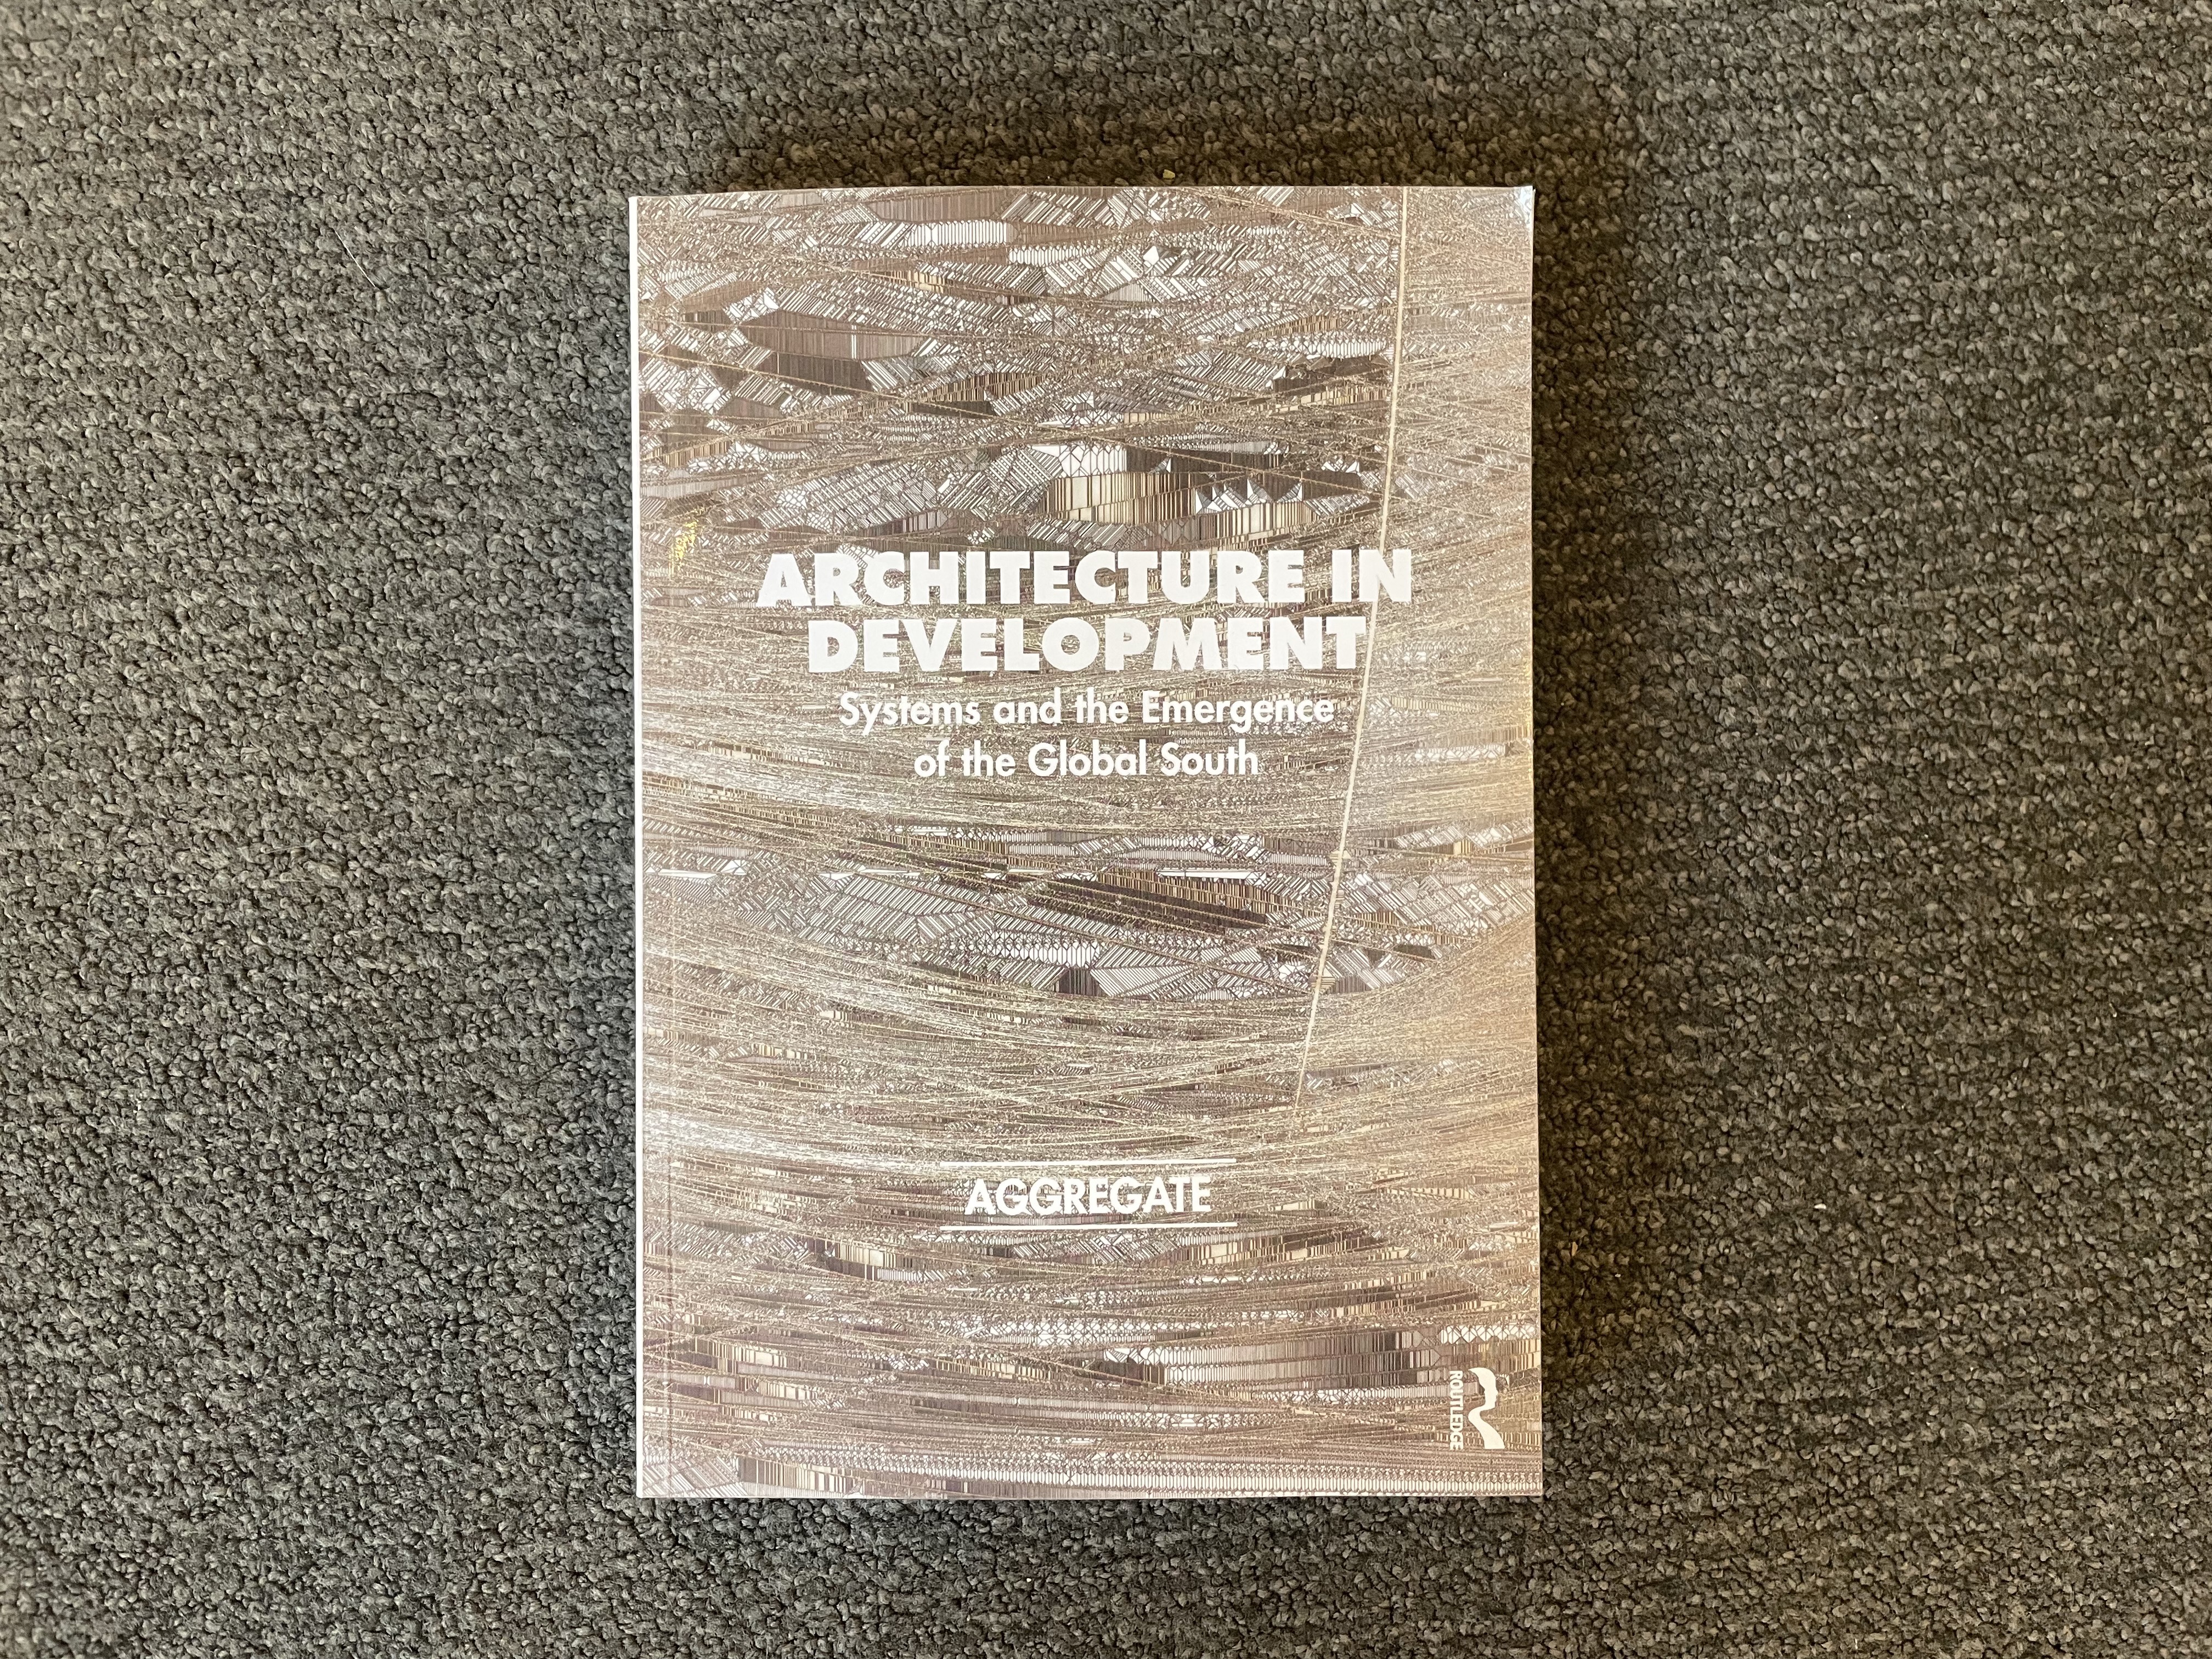 A book with a light brown and grey textured cover, potentially a line drawing or potentially photographic, reads "Architecture in Development: Systems and the Emergence of the Global South | Aggregate."